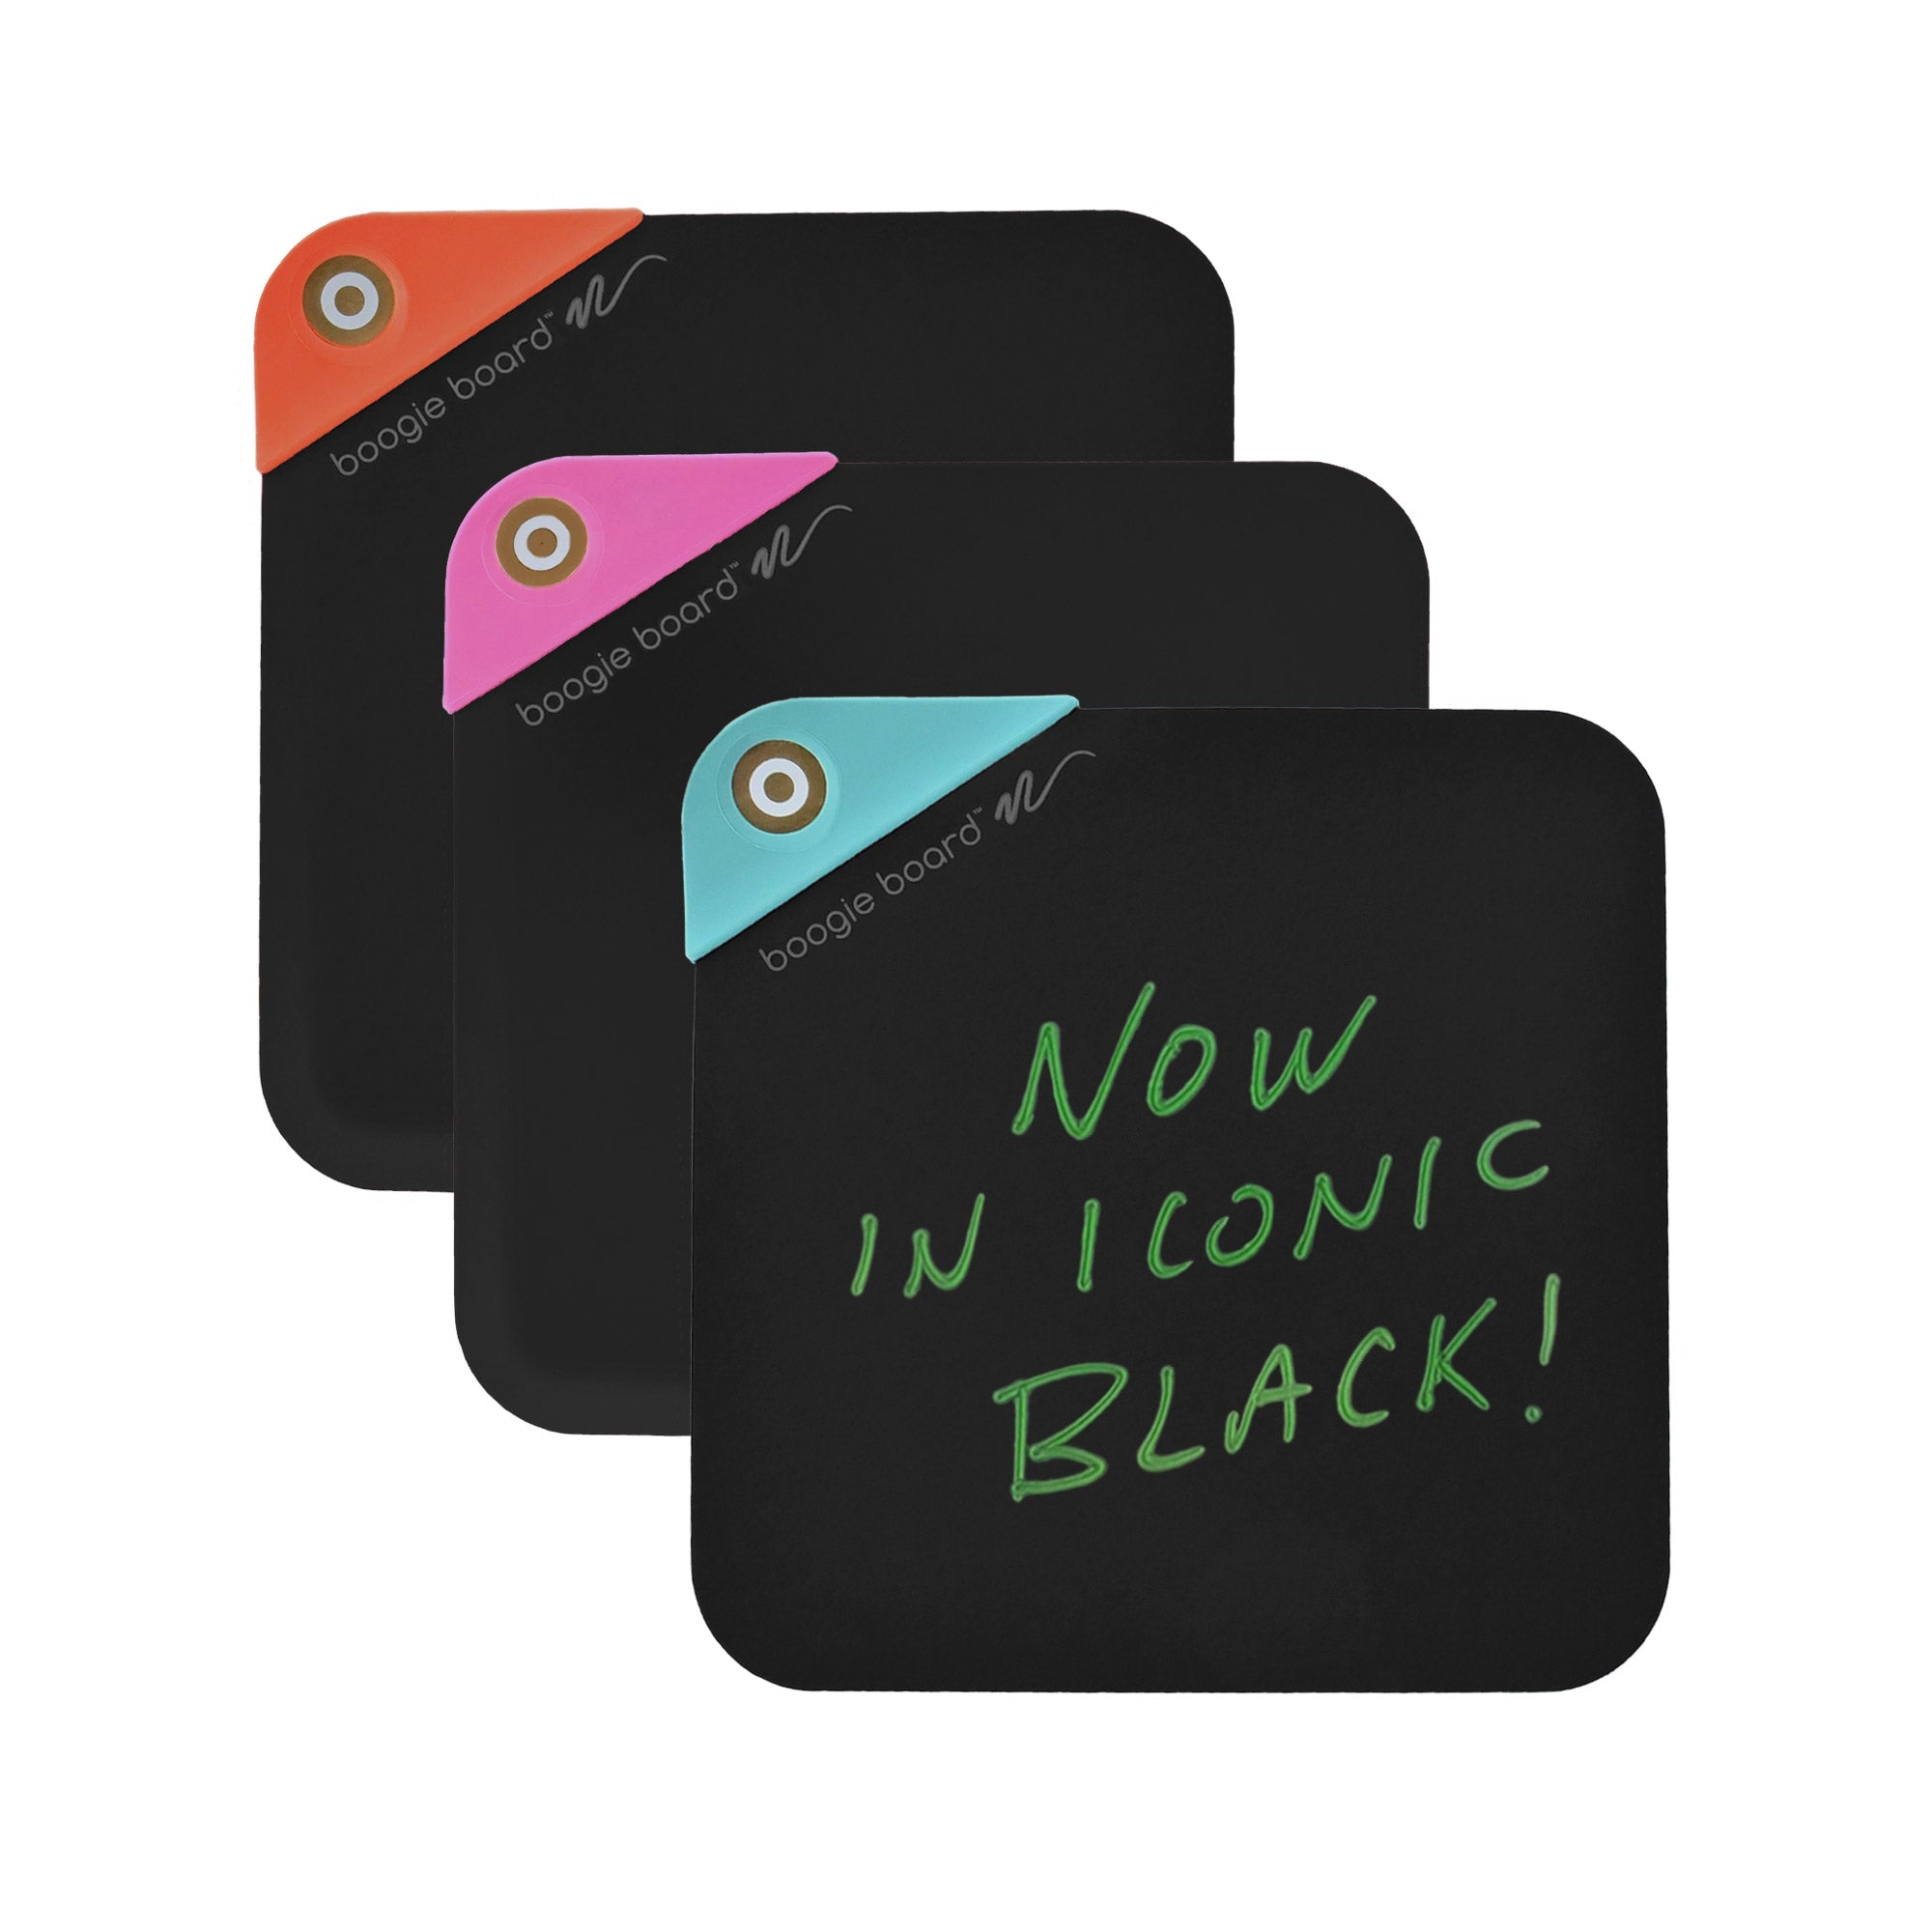 Boogie Board - VersaNotes Reusable Notes 4x4 Expansion Pack Tricolor